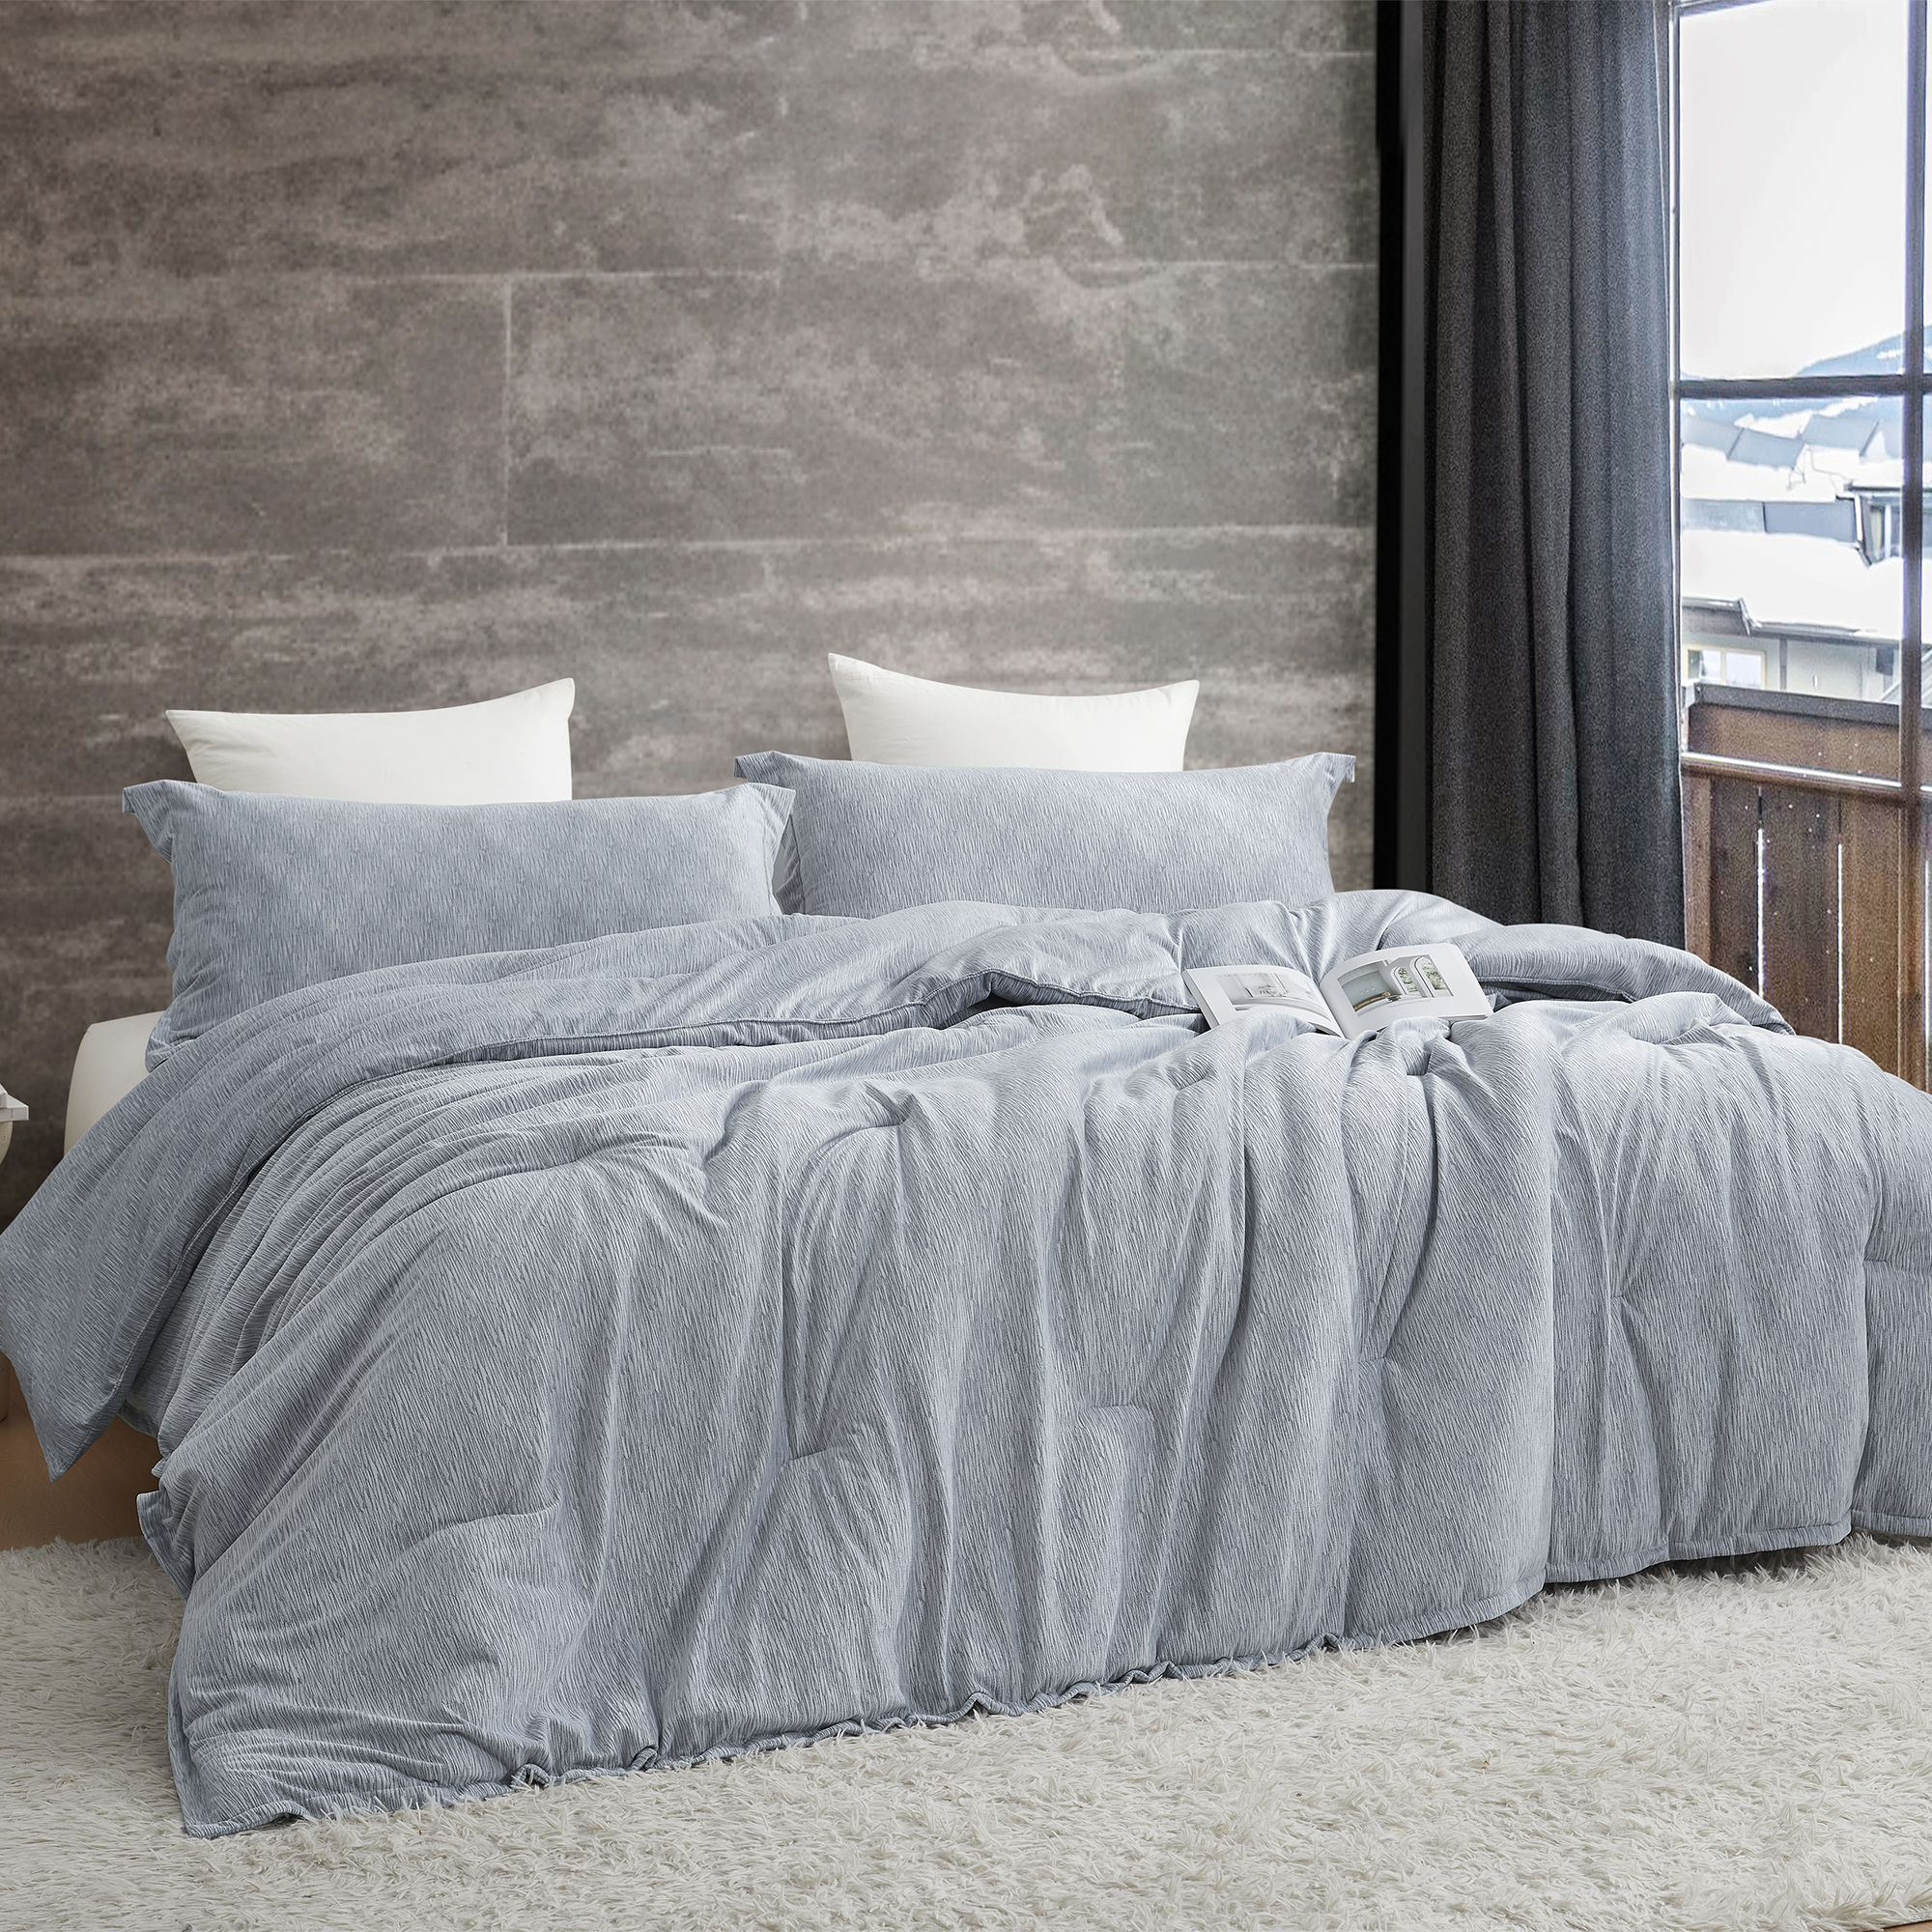 Daydreamer - Coma Inducer® Oversized King Comforter - Navy Etch